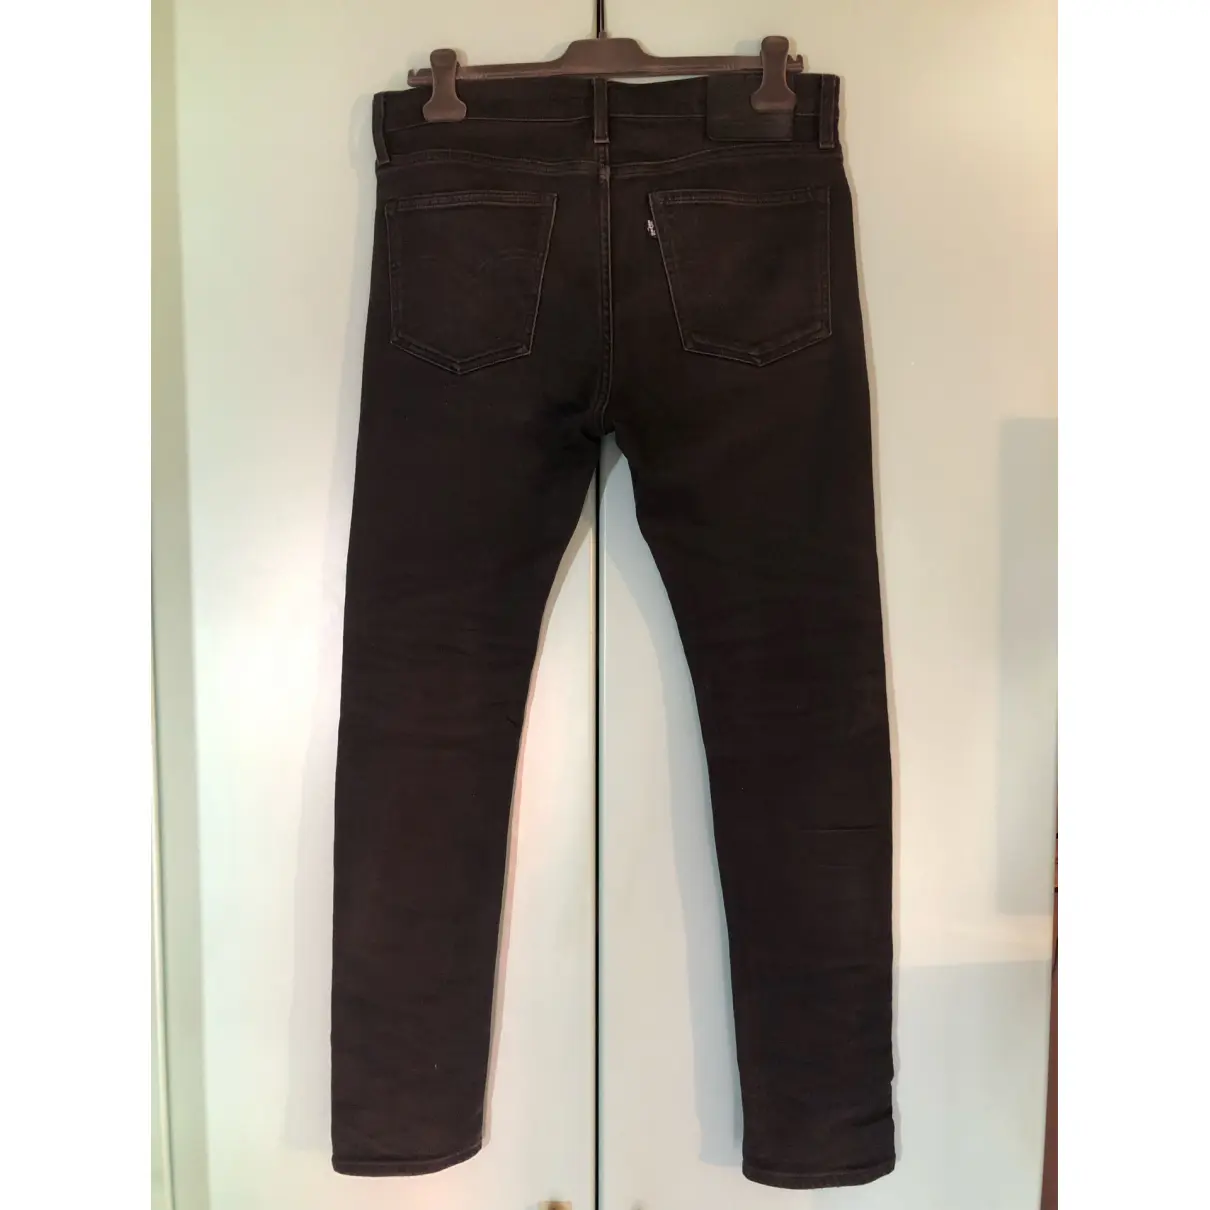 Buy Levi's Made & Crafted Slim jean online